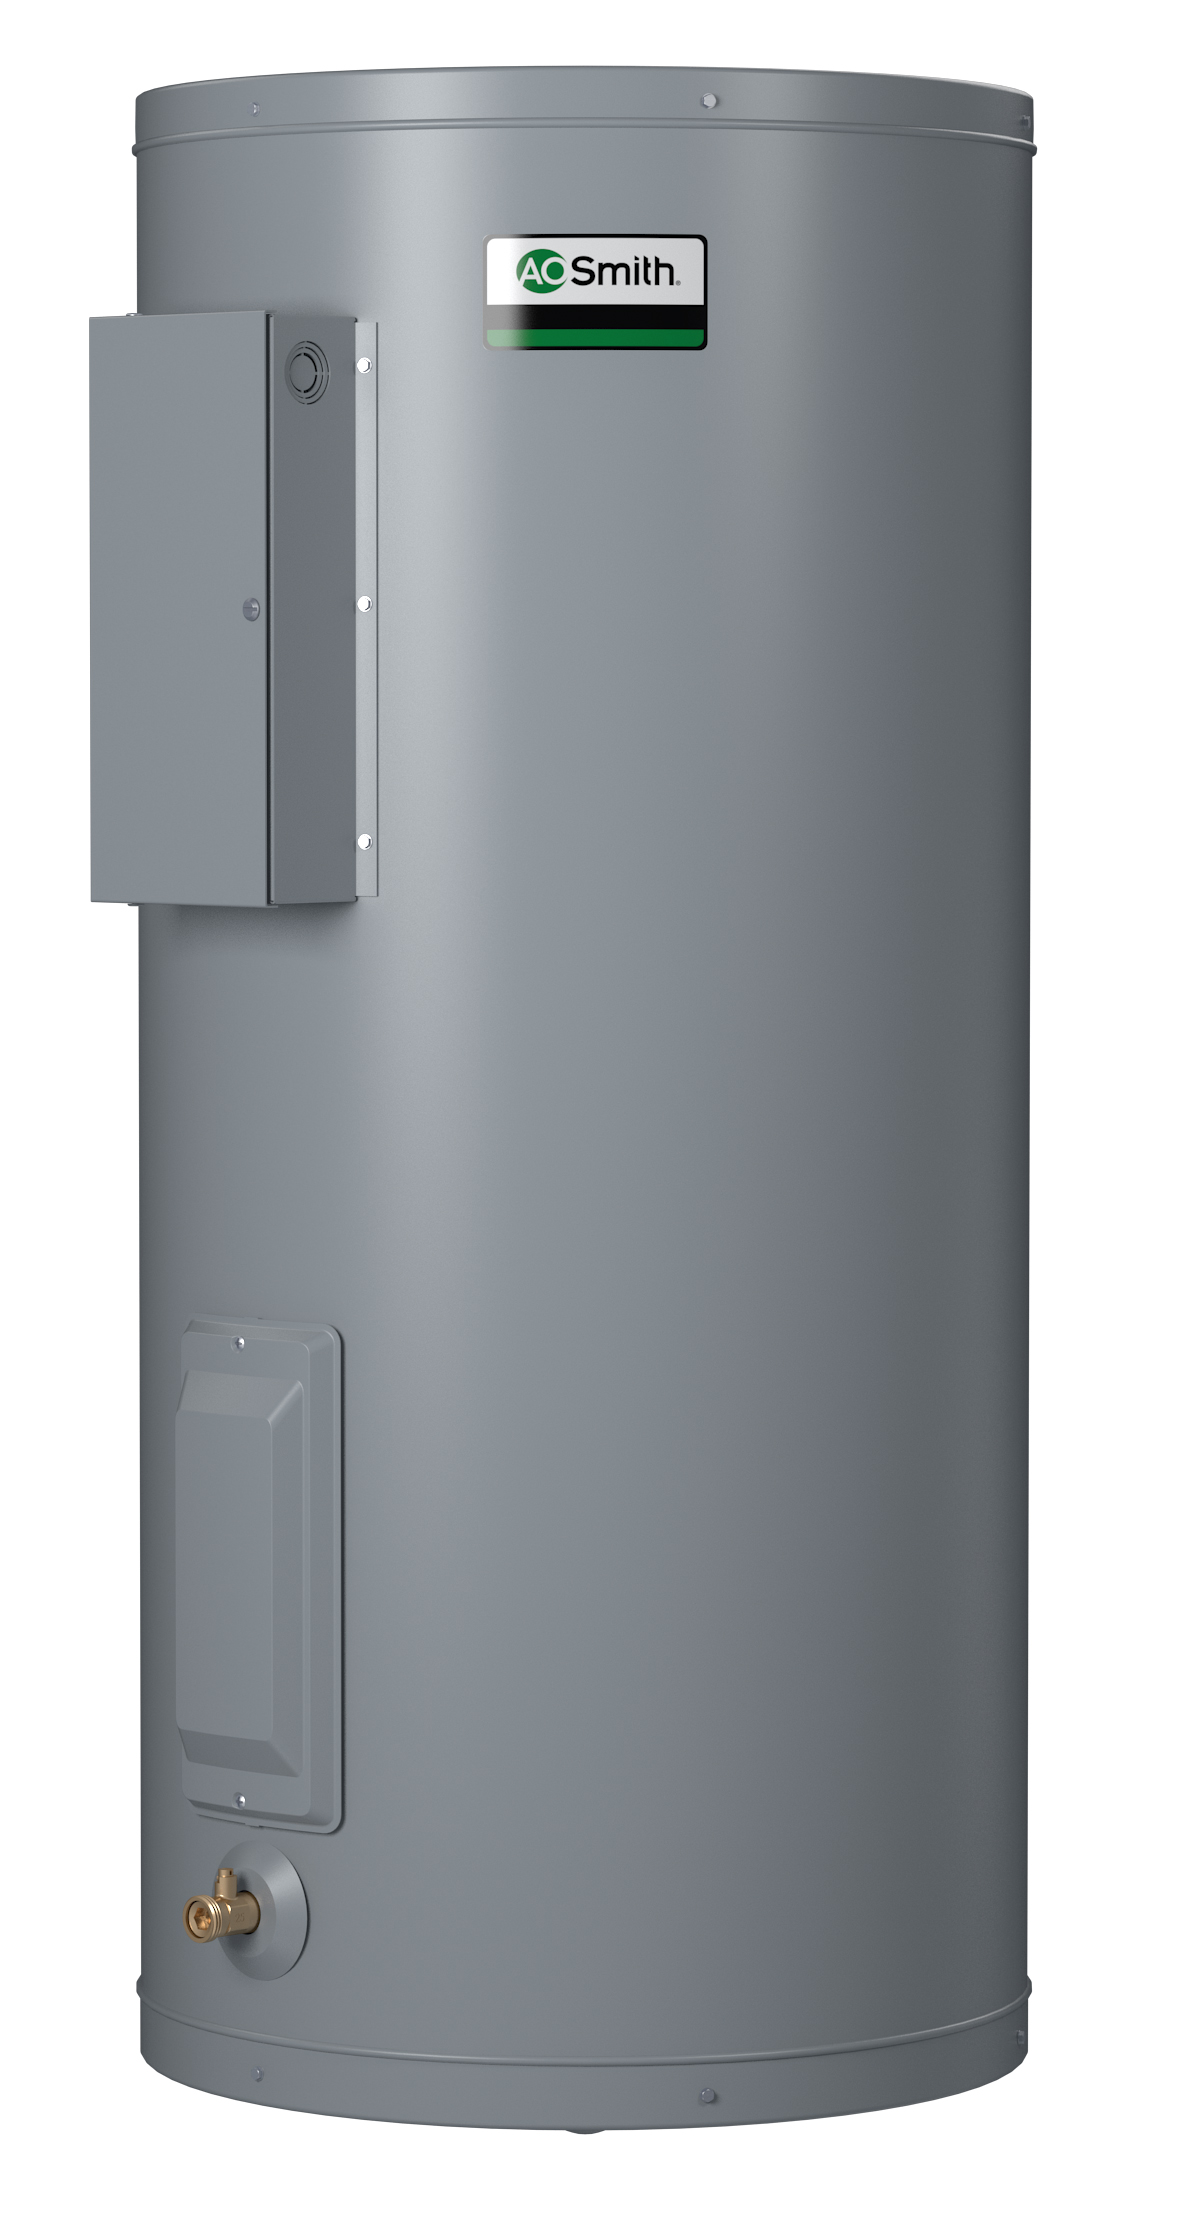 AO SMITH DEN-120D: 120 GALLONS, 1.5KW, 240 VOLT, 1 PHASE, (2-1500 WATT ELEMENTS, NON-SIMULTANEOUS WIRING), DURA-POWER, LIGHT DUTY COMMERCIAL ELECTRIC WATER HEATER